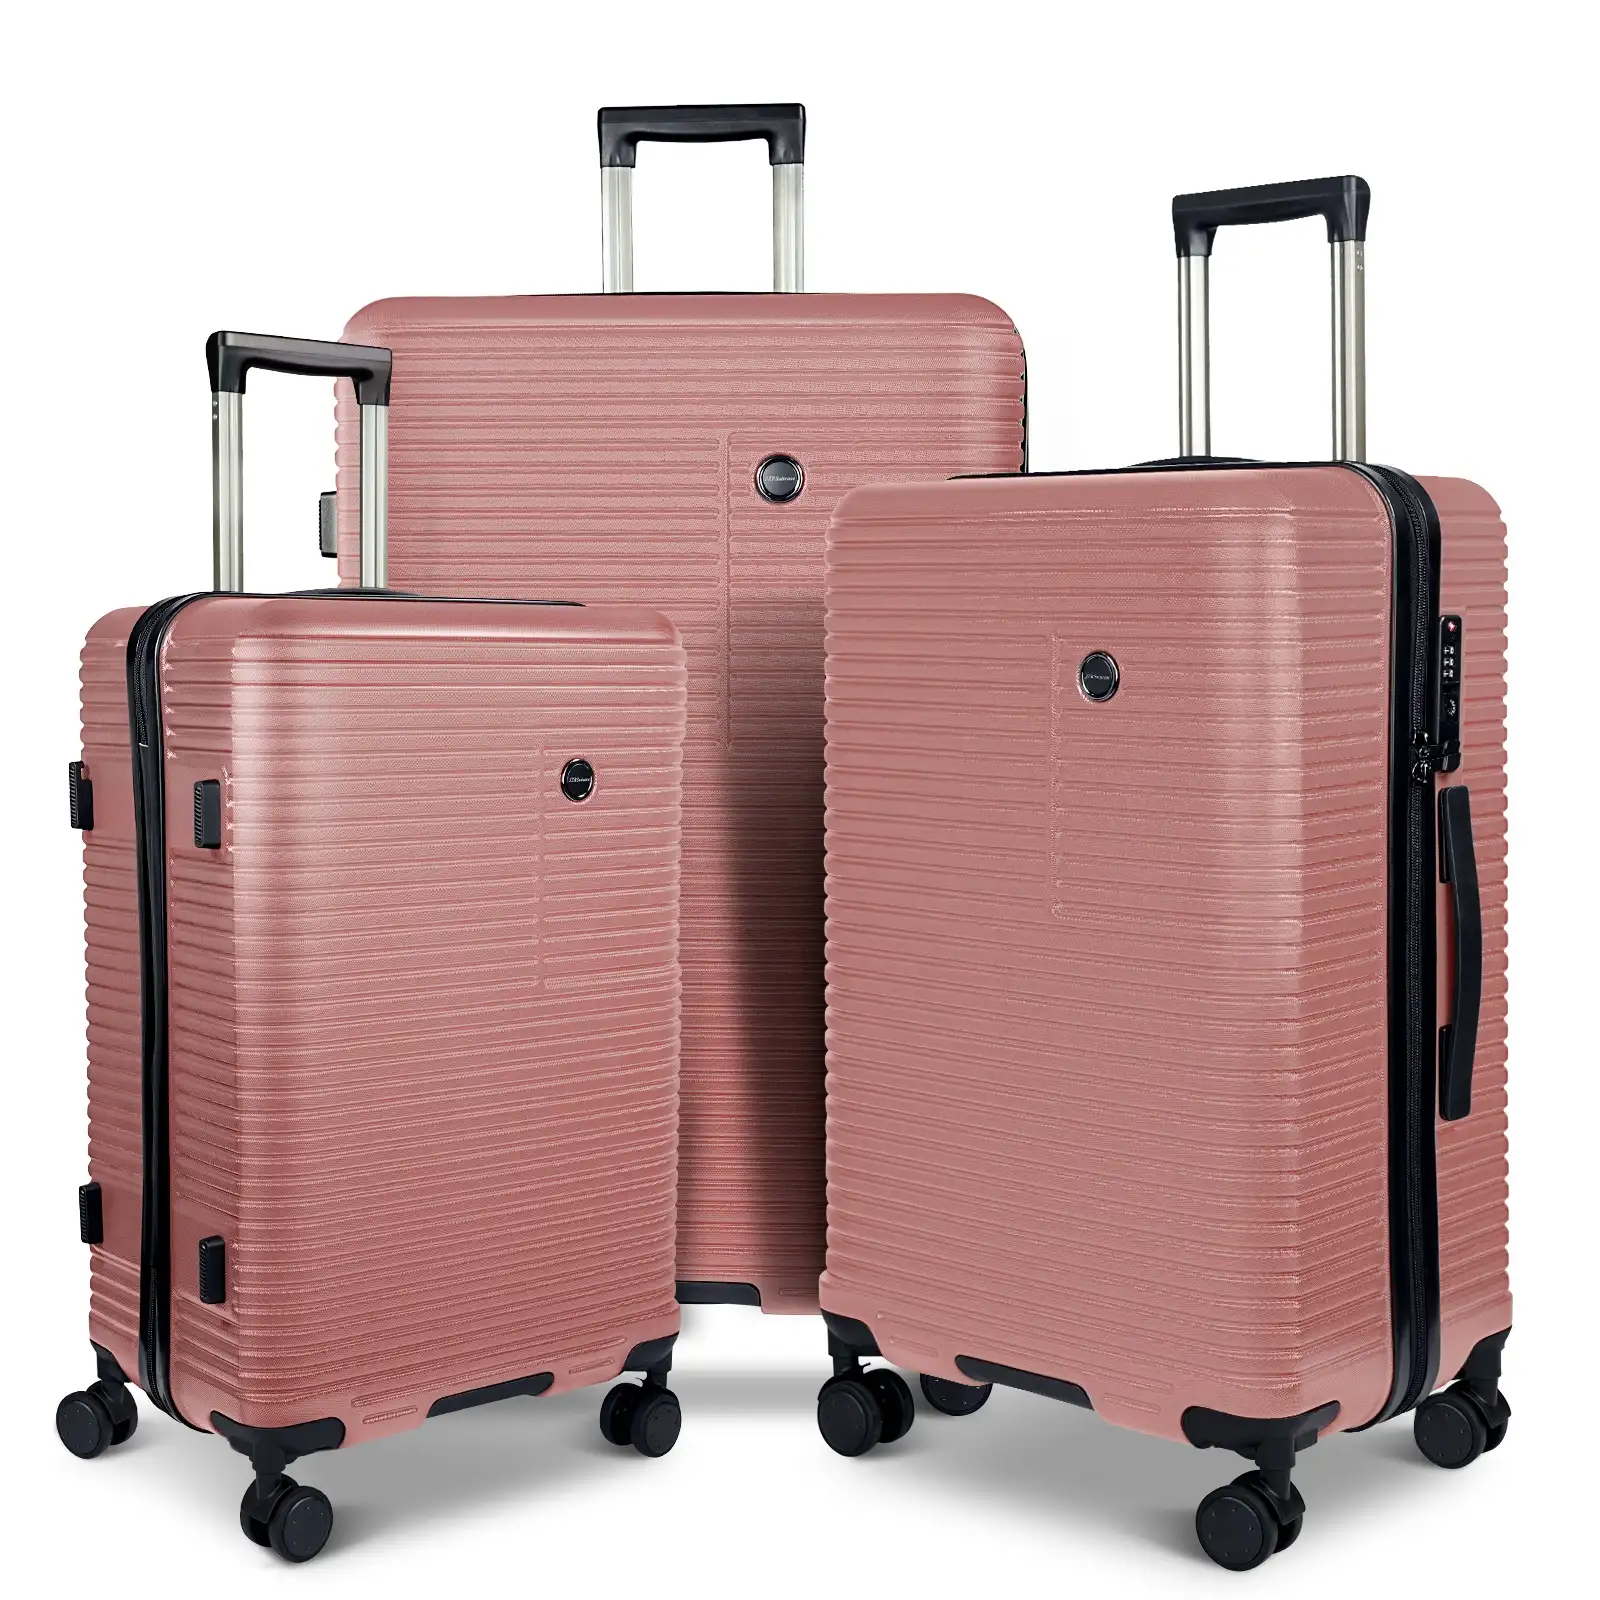 Hard Shell PC Luggage High Quality Suitcase Travel Trolley Case on Wheels